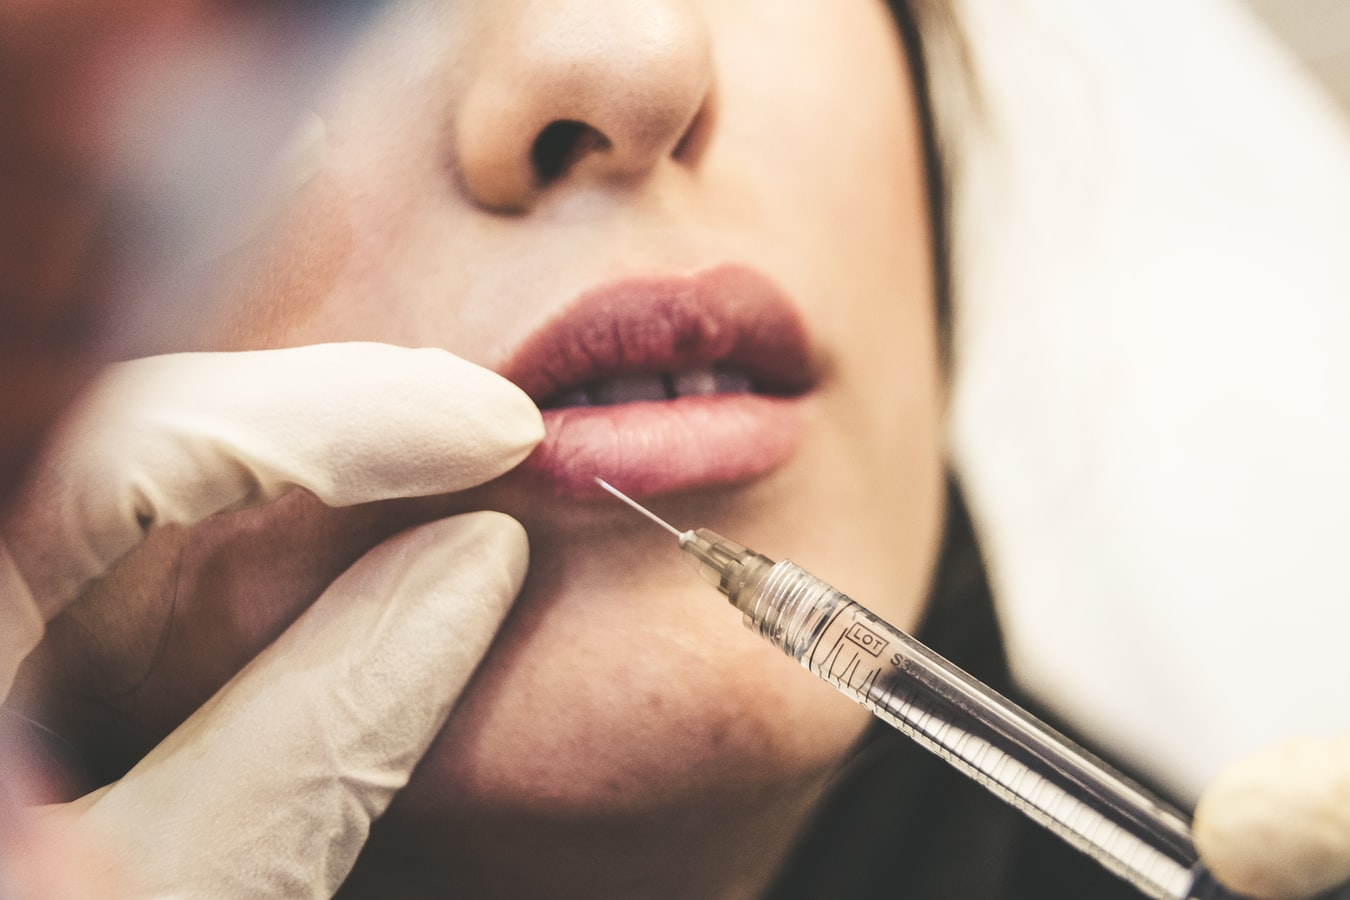 How to Get the Finest Results with Dermal Filler Treatment in San Diego